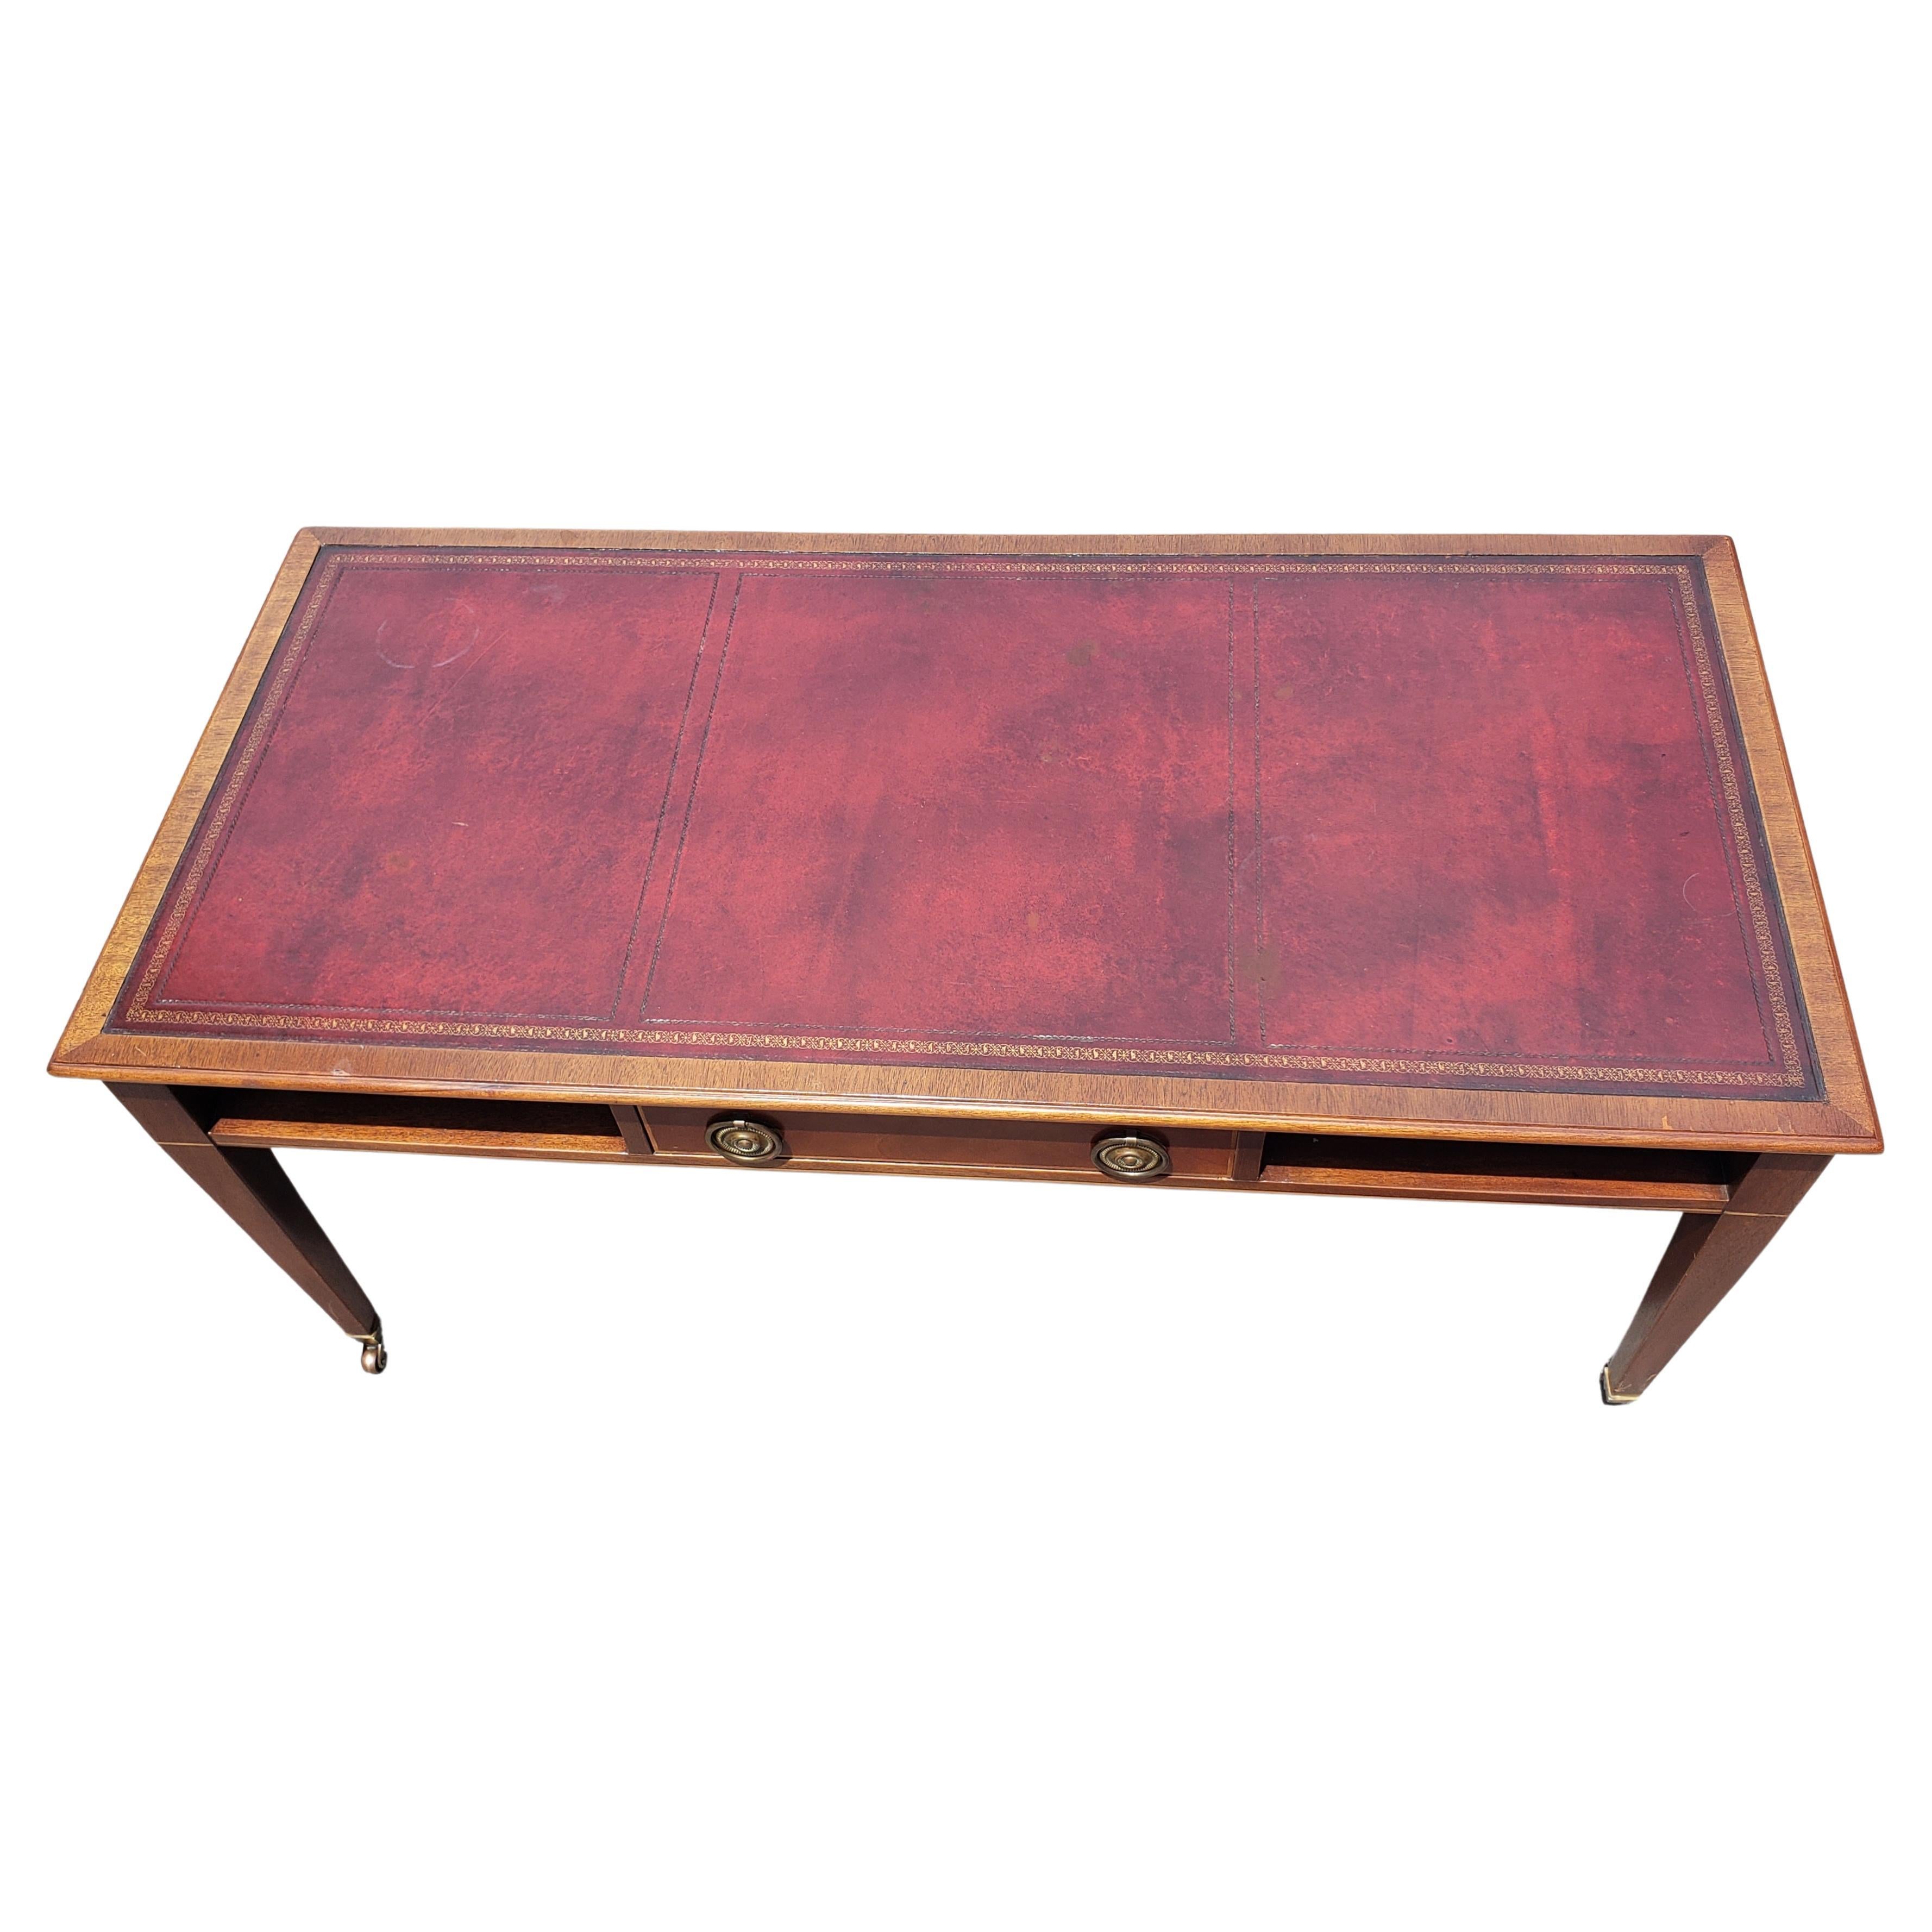 A beautiful  Mahogany Maroon Leather Inset Top Coffee Table on Wheels in the George III Style. Table features Banded top edges, original wheels and one top center drawer with two side storage shelves.  Table is in good vintage condition and measures